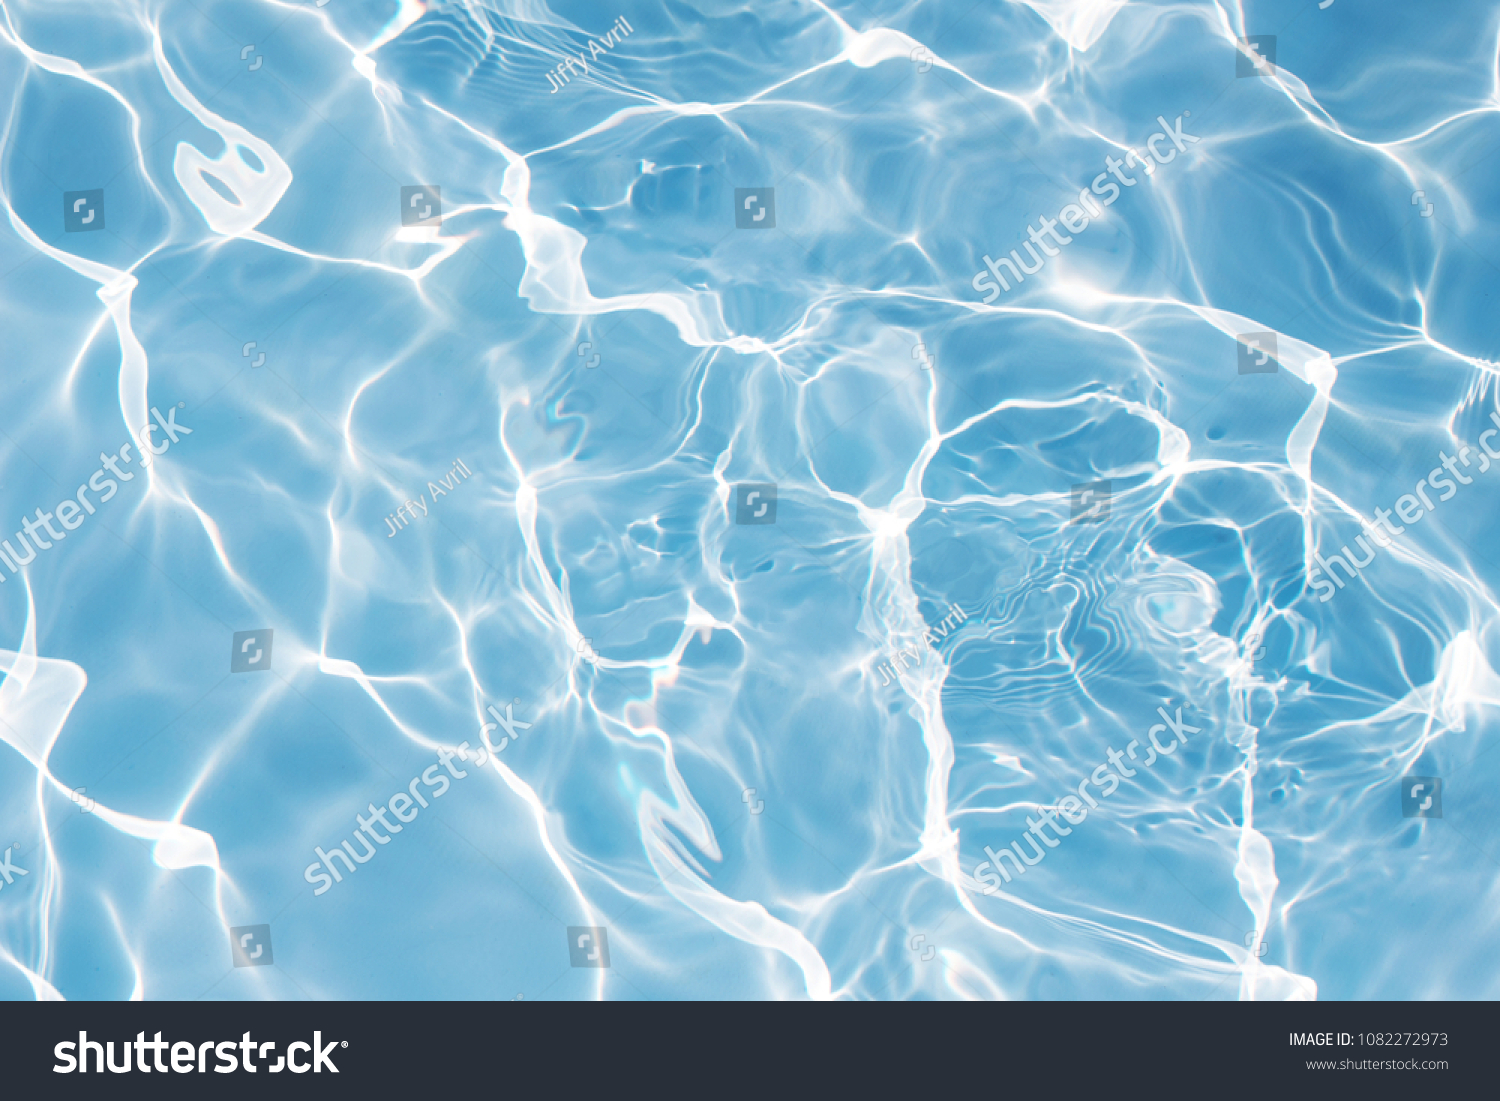 Texture of water in swimming pool for background #1082272973